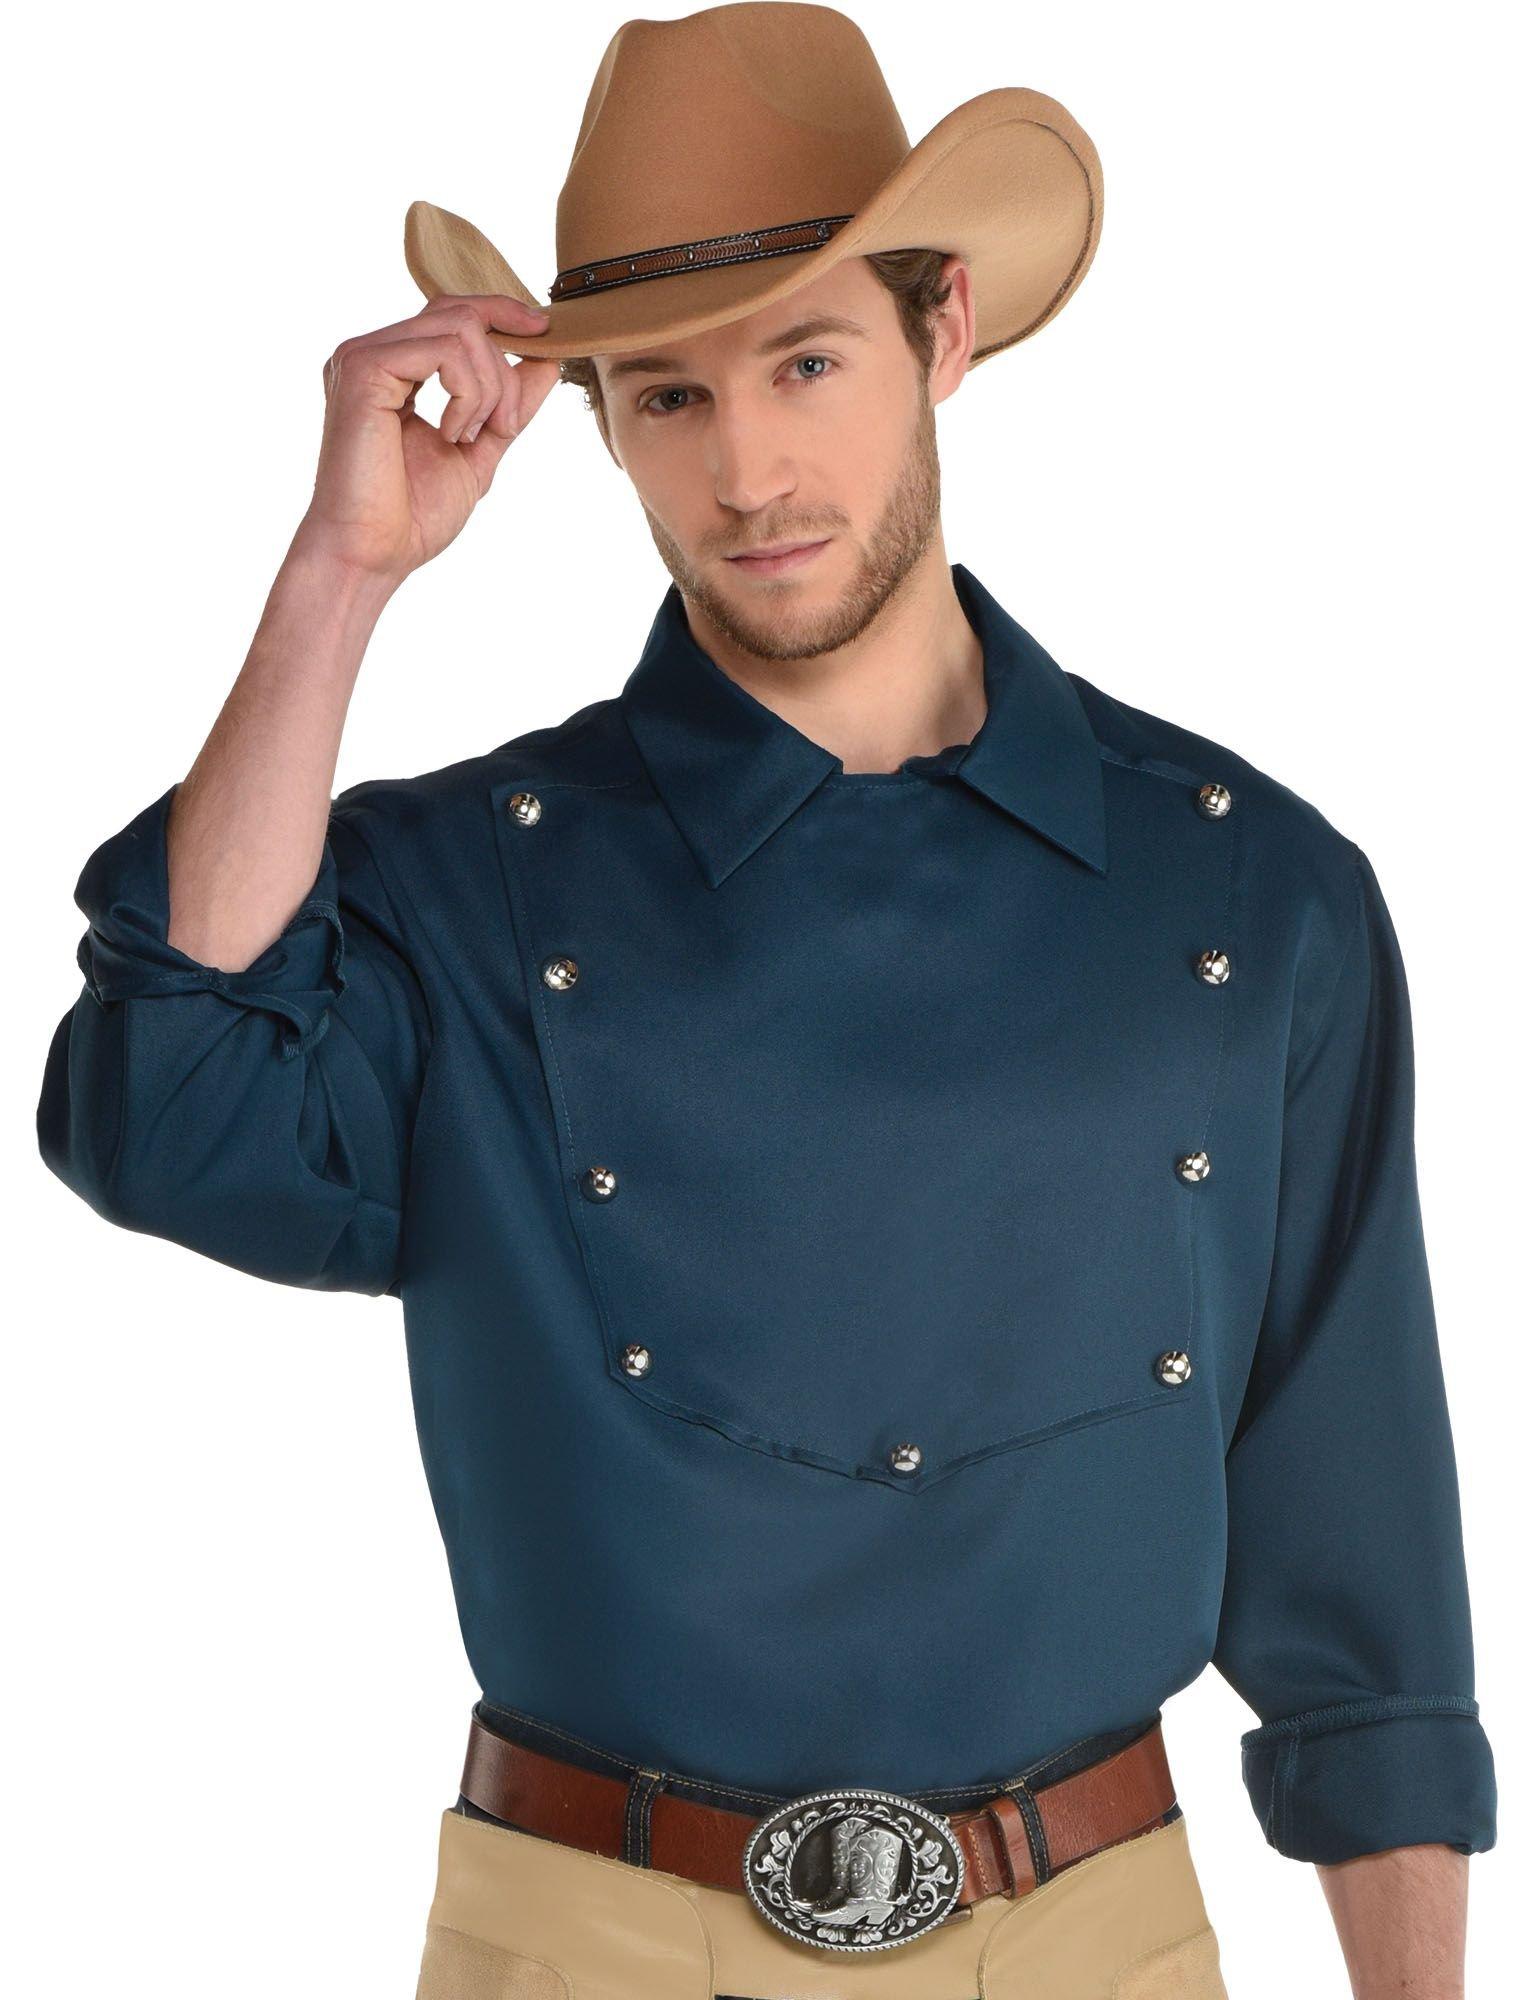 Navy Blue Cowboy Collared Shirt for Adults